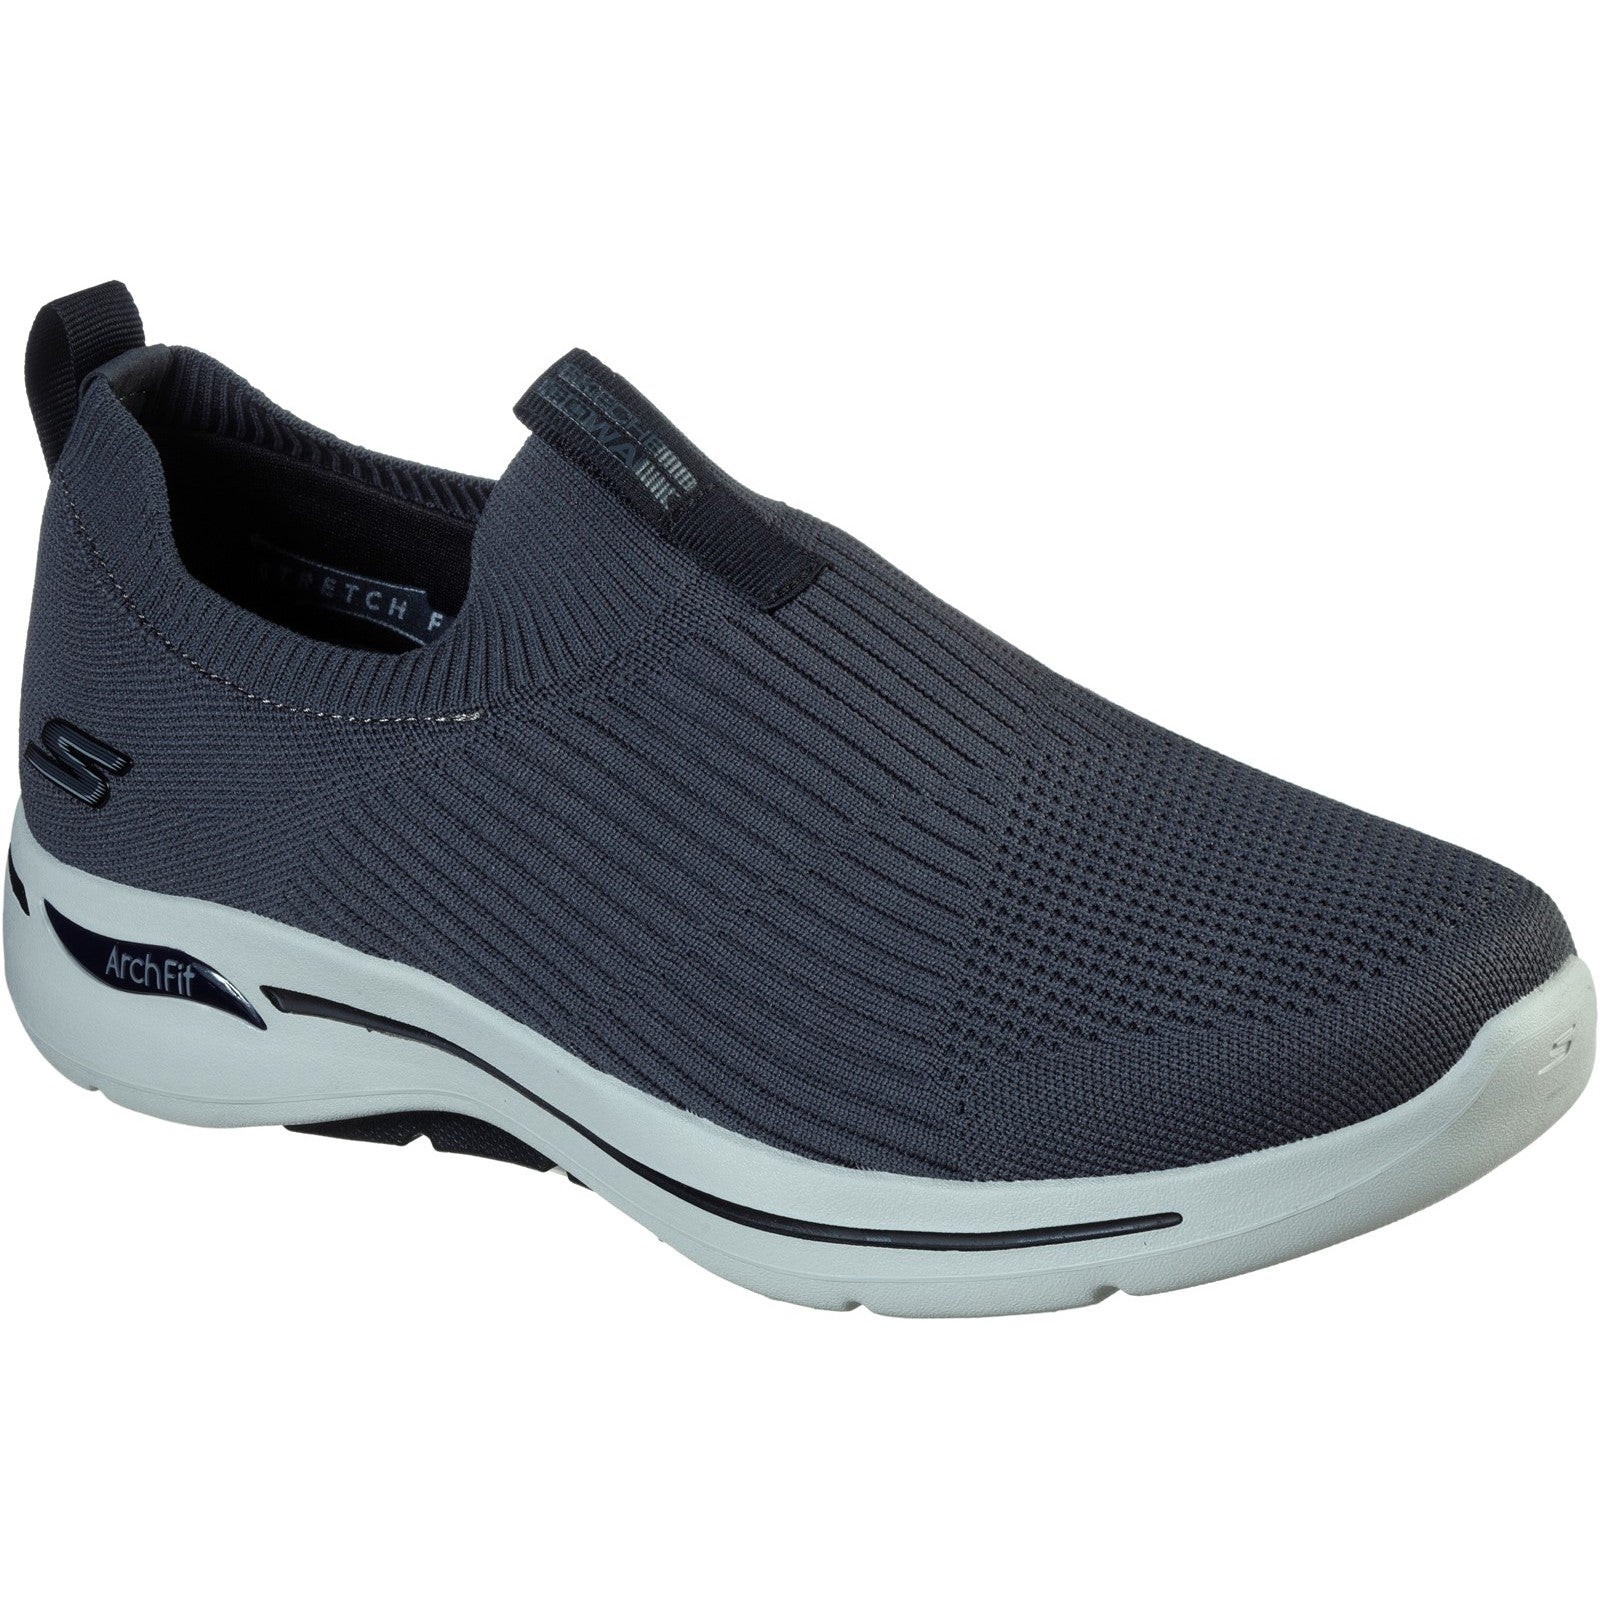 Skechers Go Walk Arch Fit Iconic Slip On Trainers